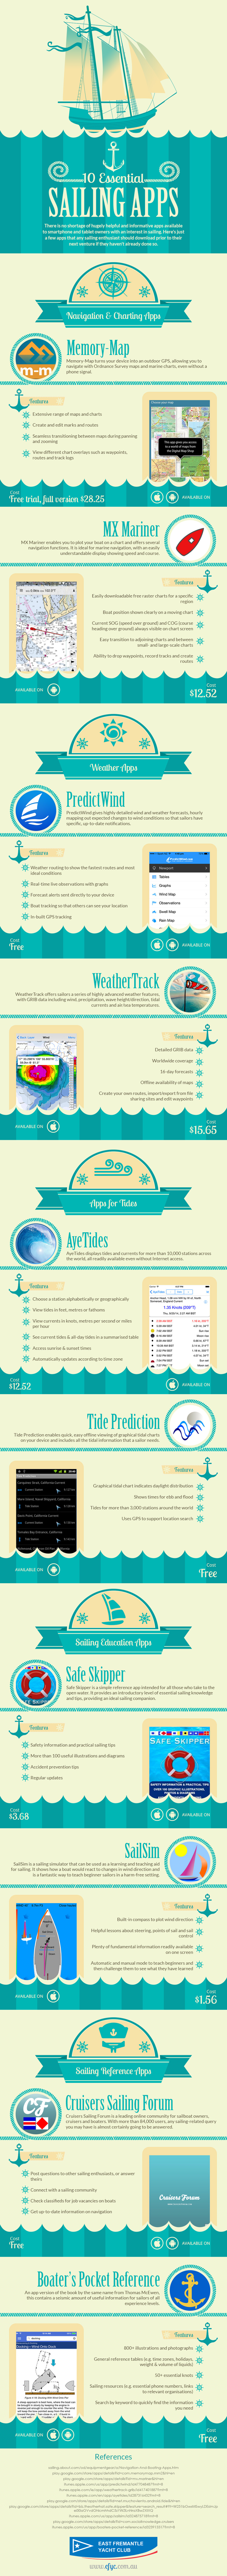 10 Essential Sailing Apps – Infographic